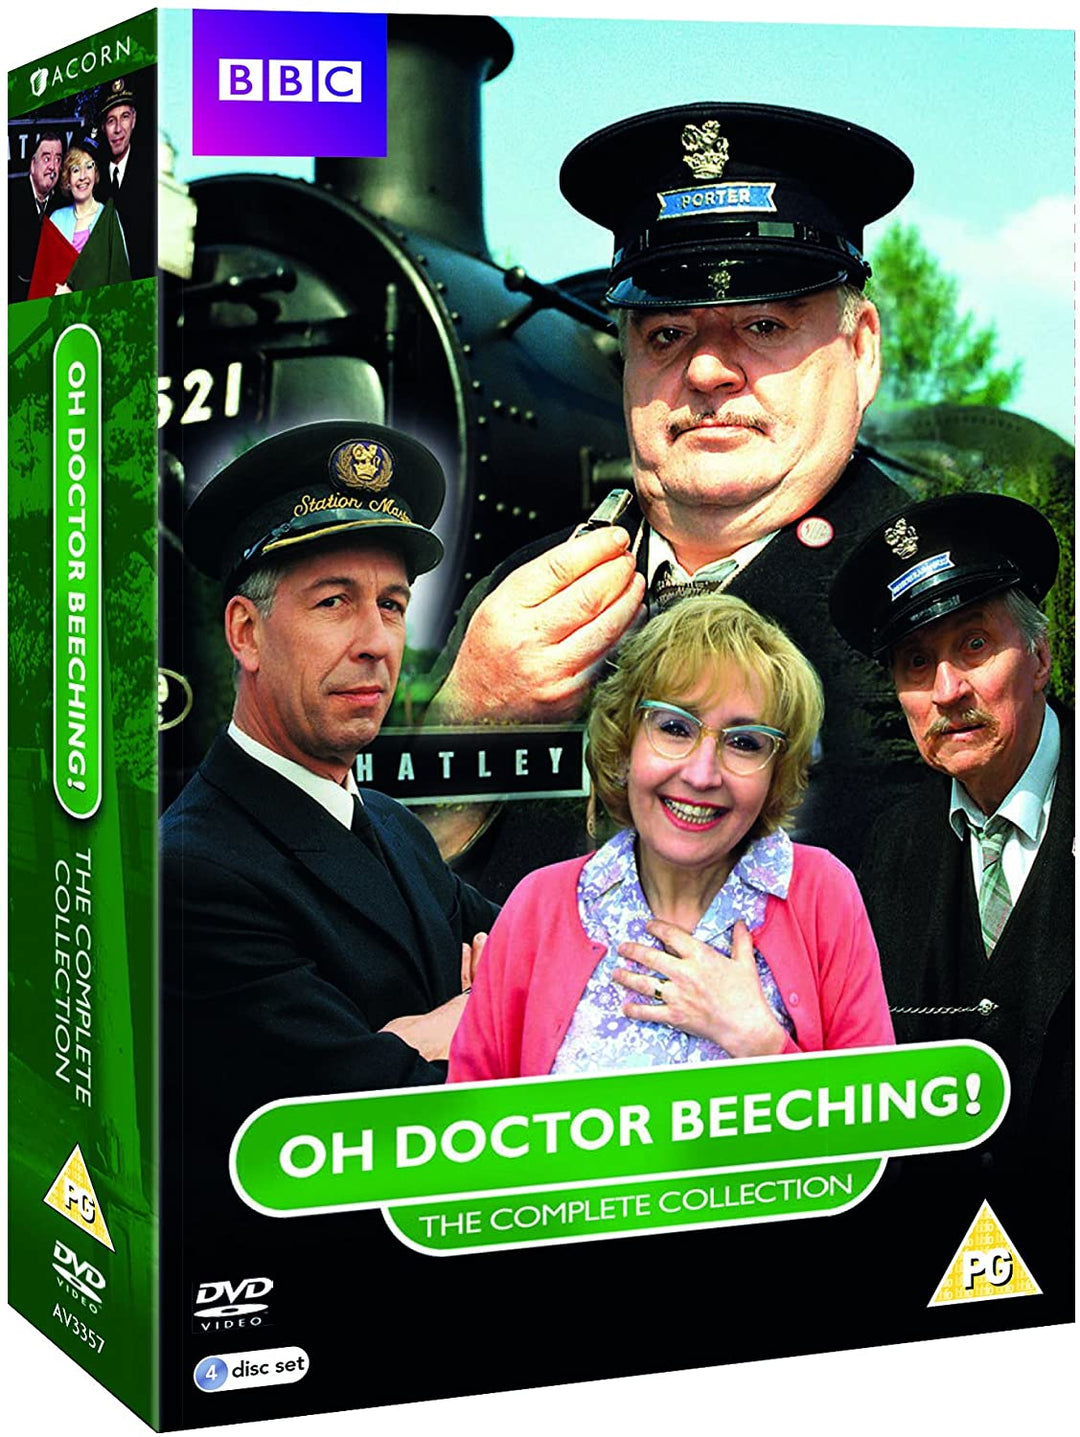 Oh Doctor Beeching: The Complete Collection - Sitcom [DVD]